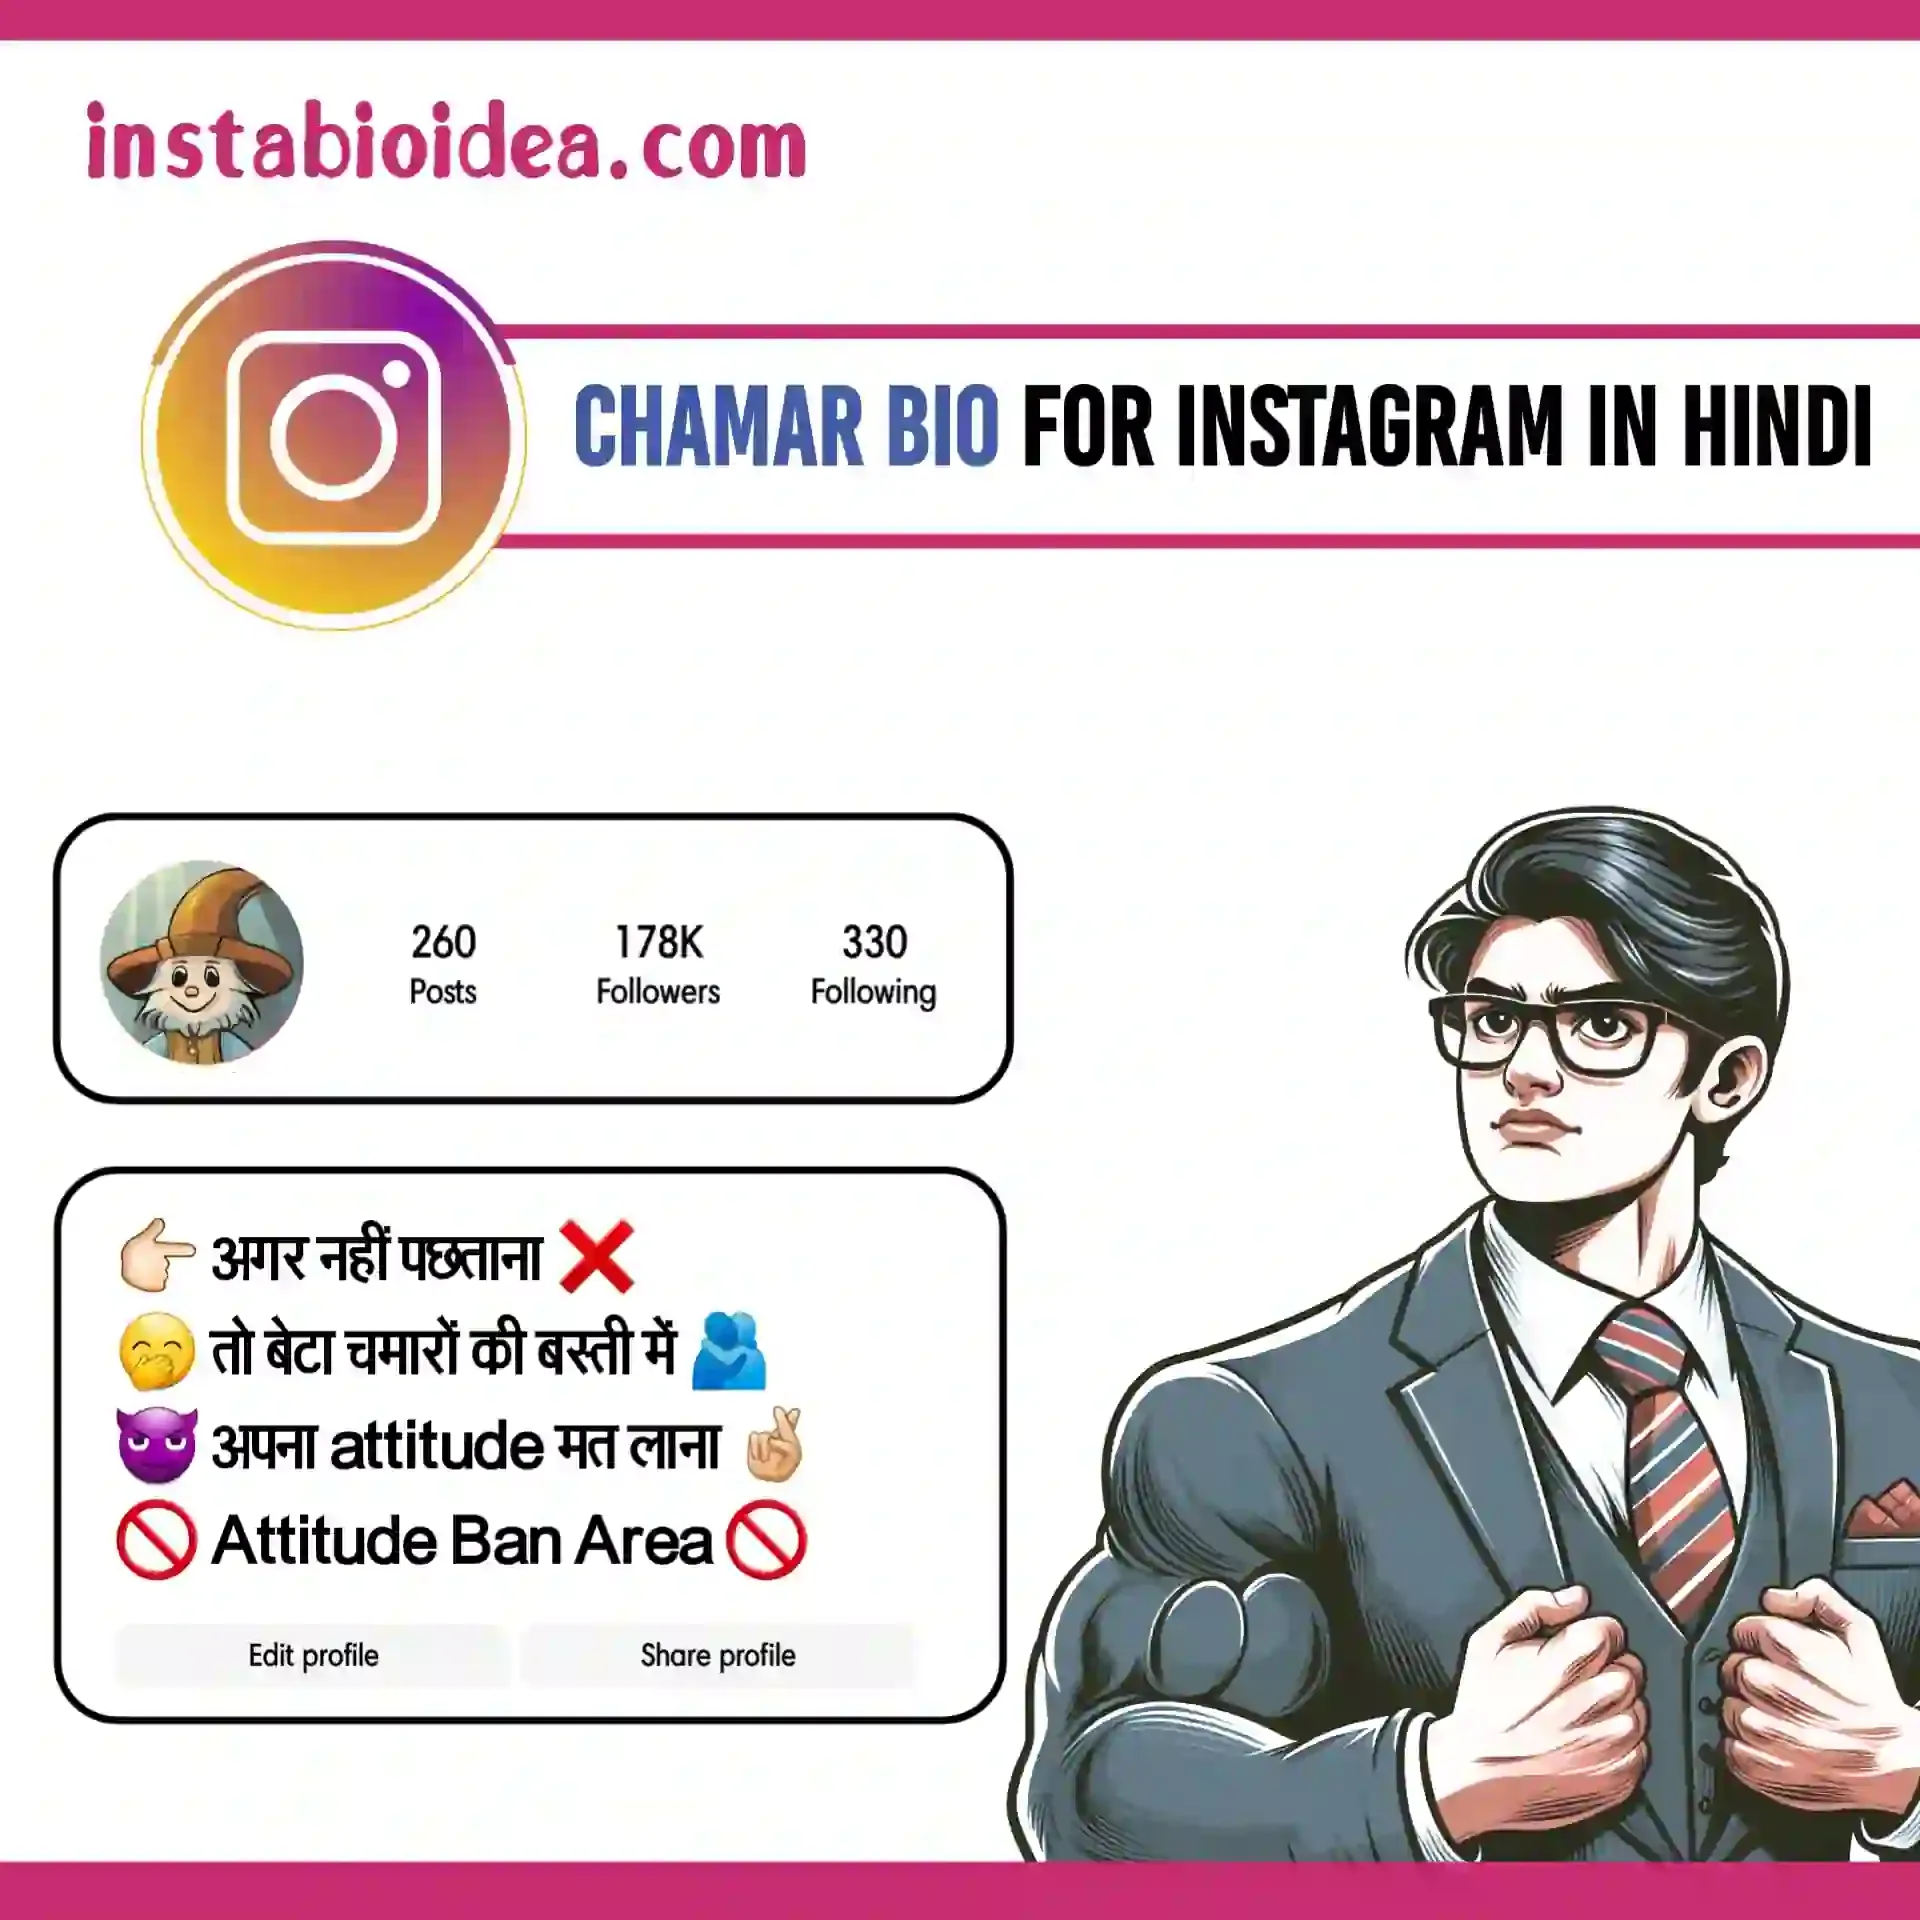 chamar bio for instagram in hindi image